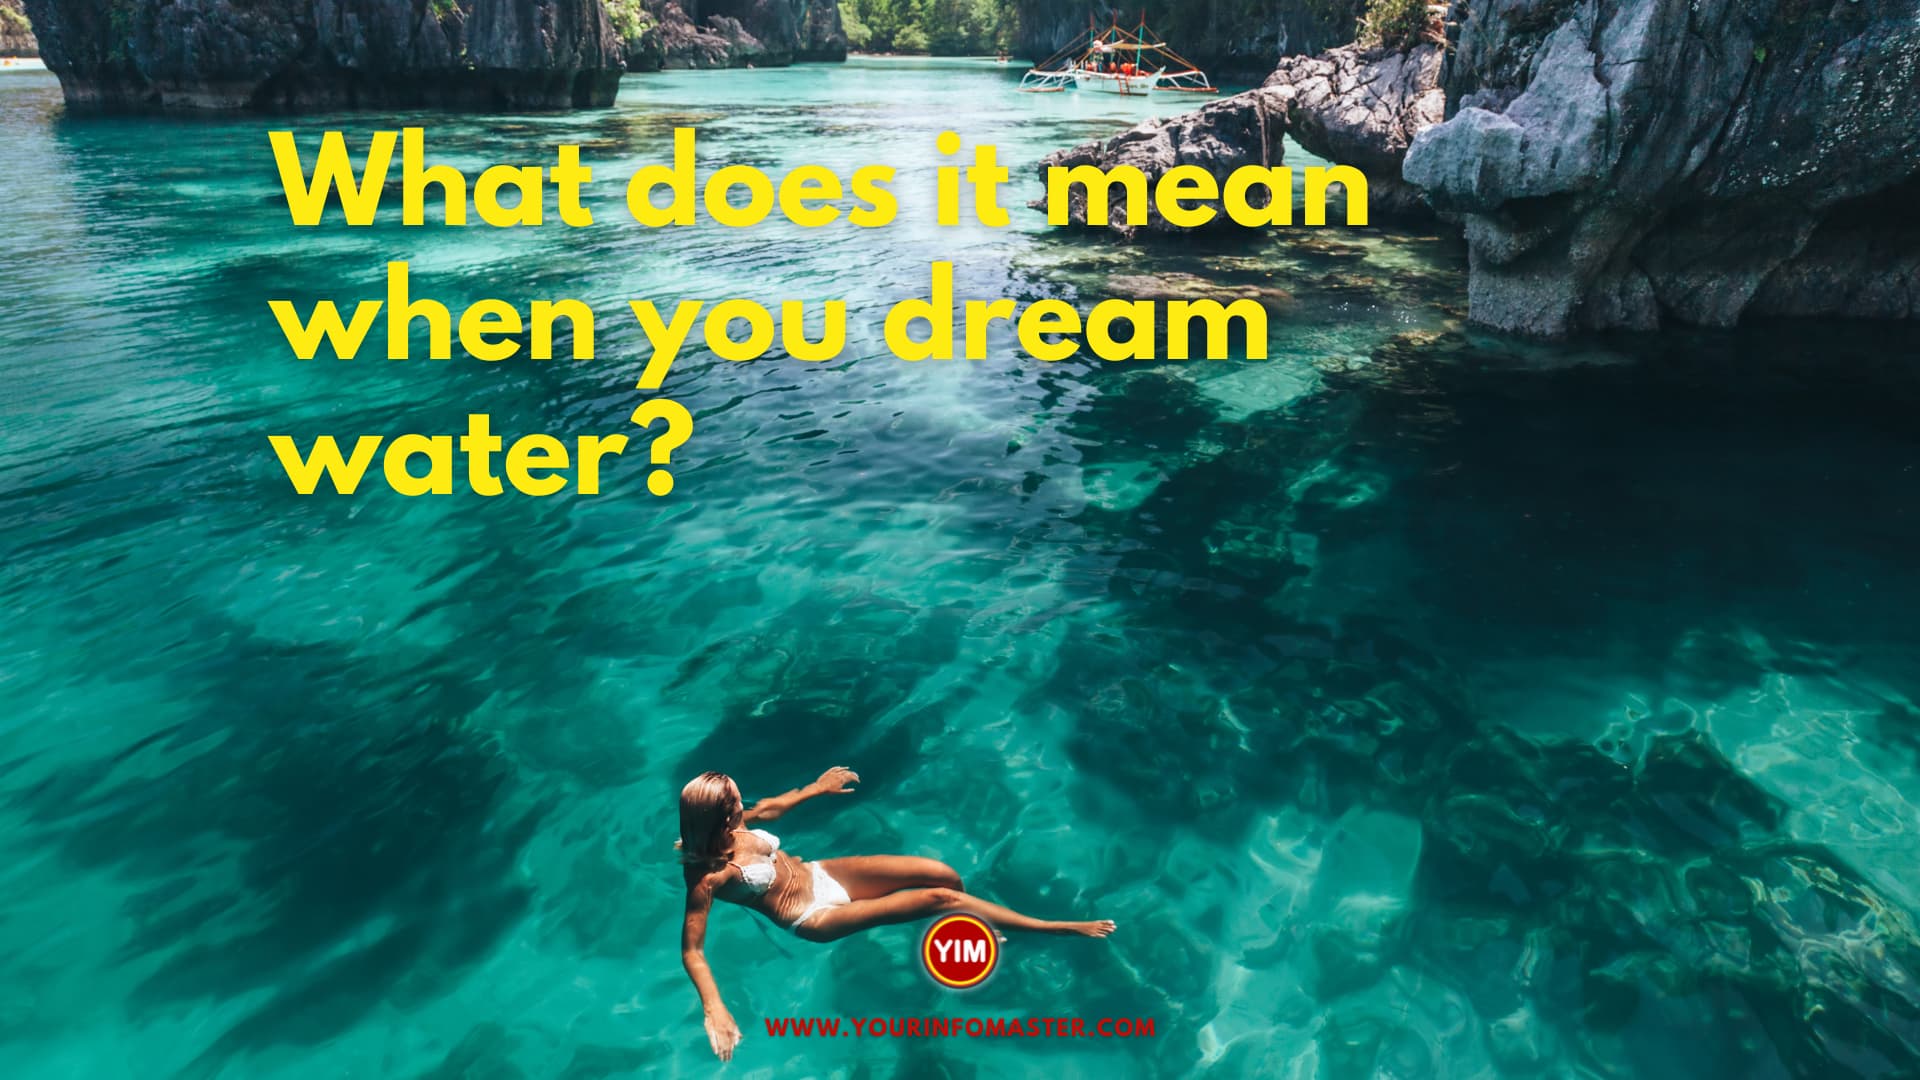 What does it mean when you dream water